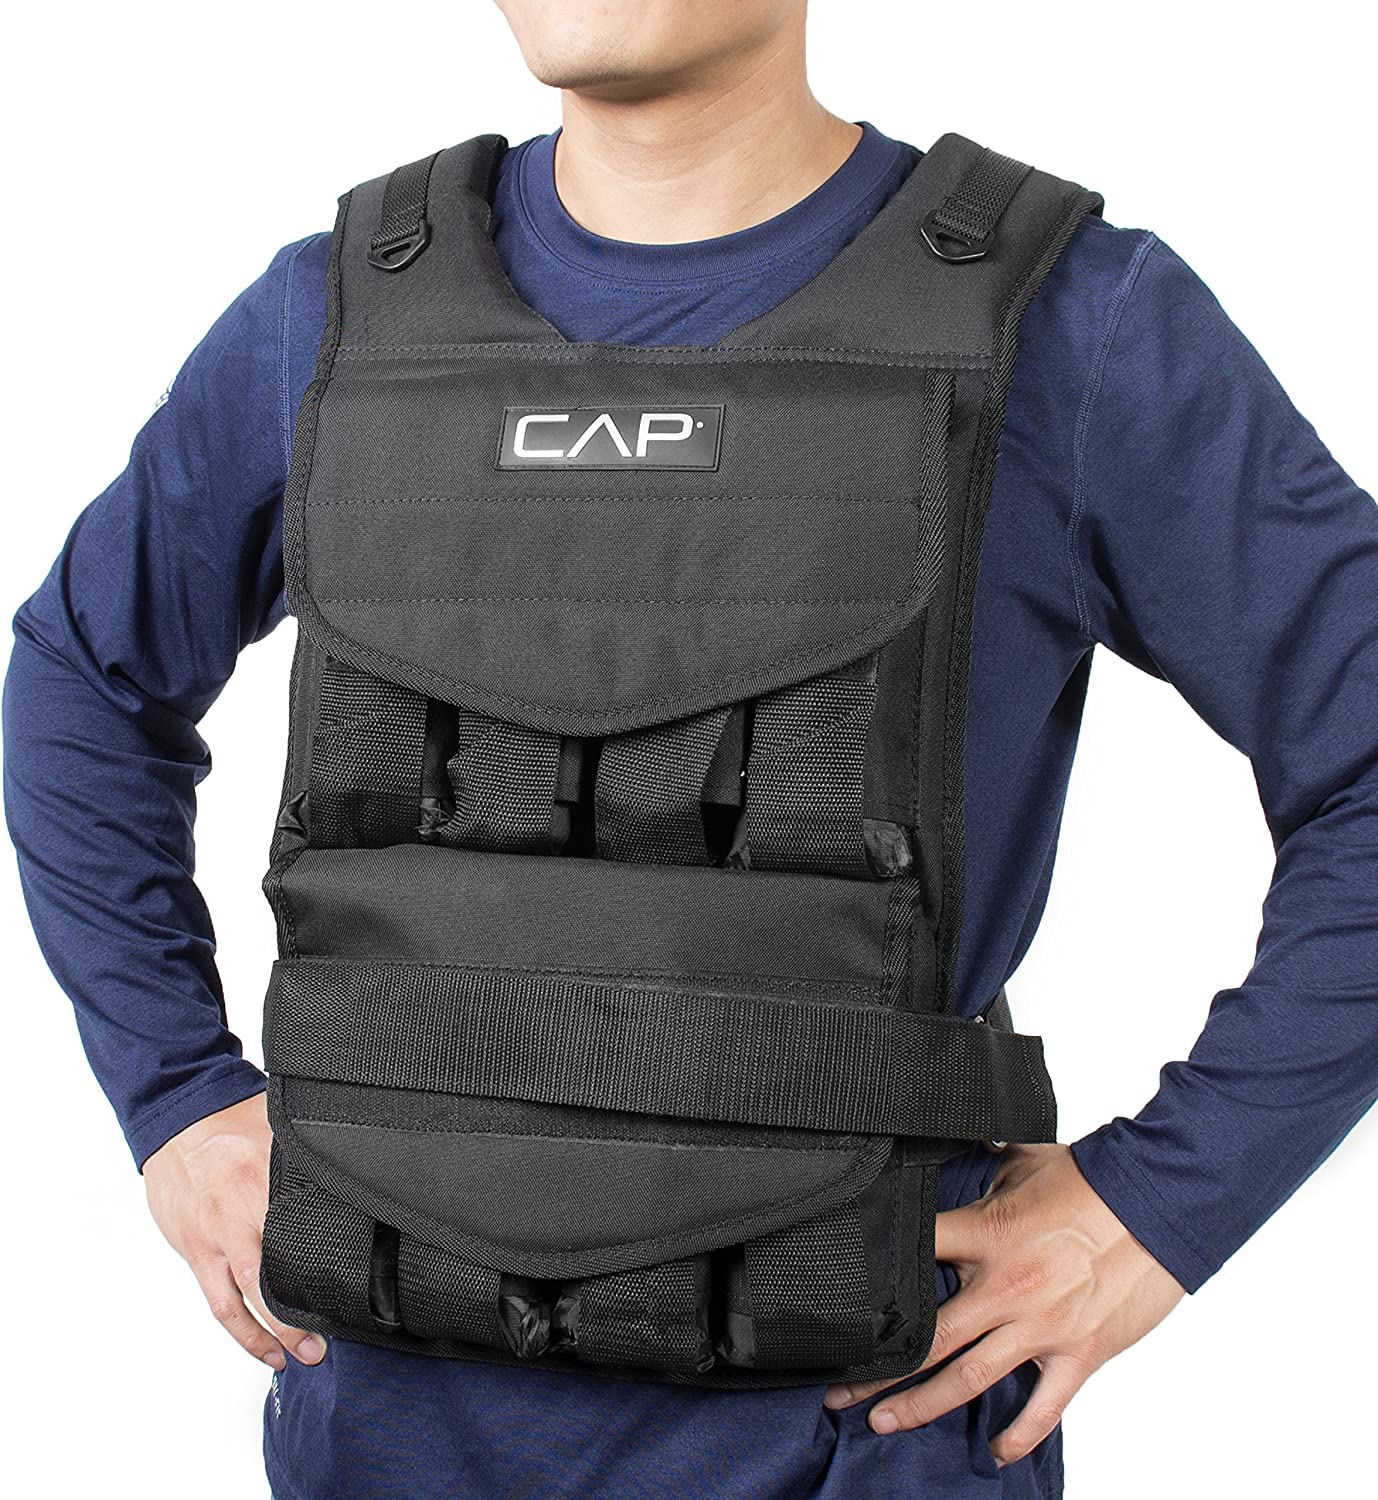 cap barbell adjustable weighted vest, 40 lb - image 2 of 5